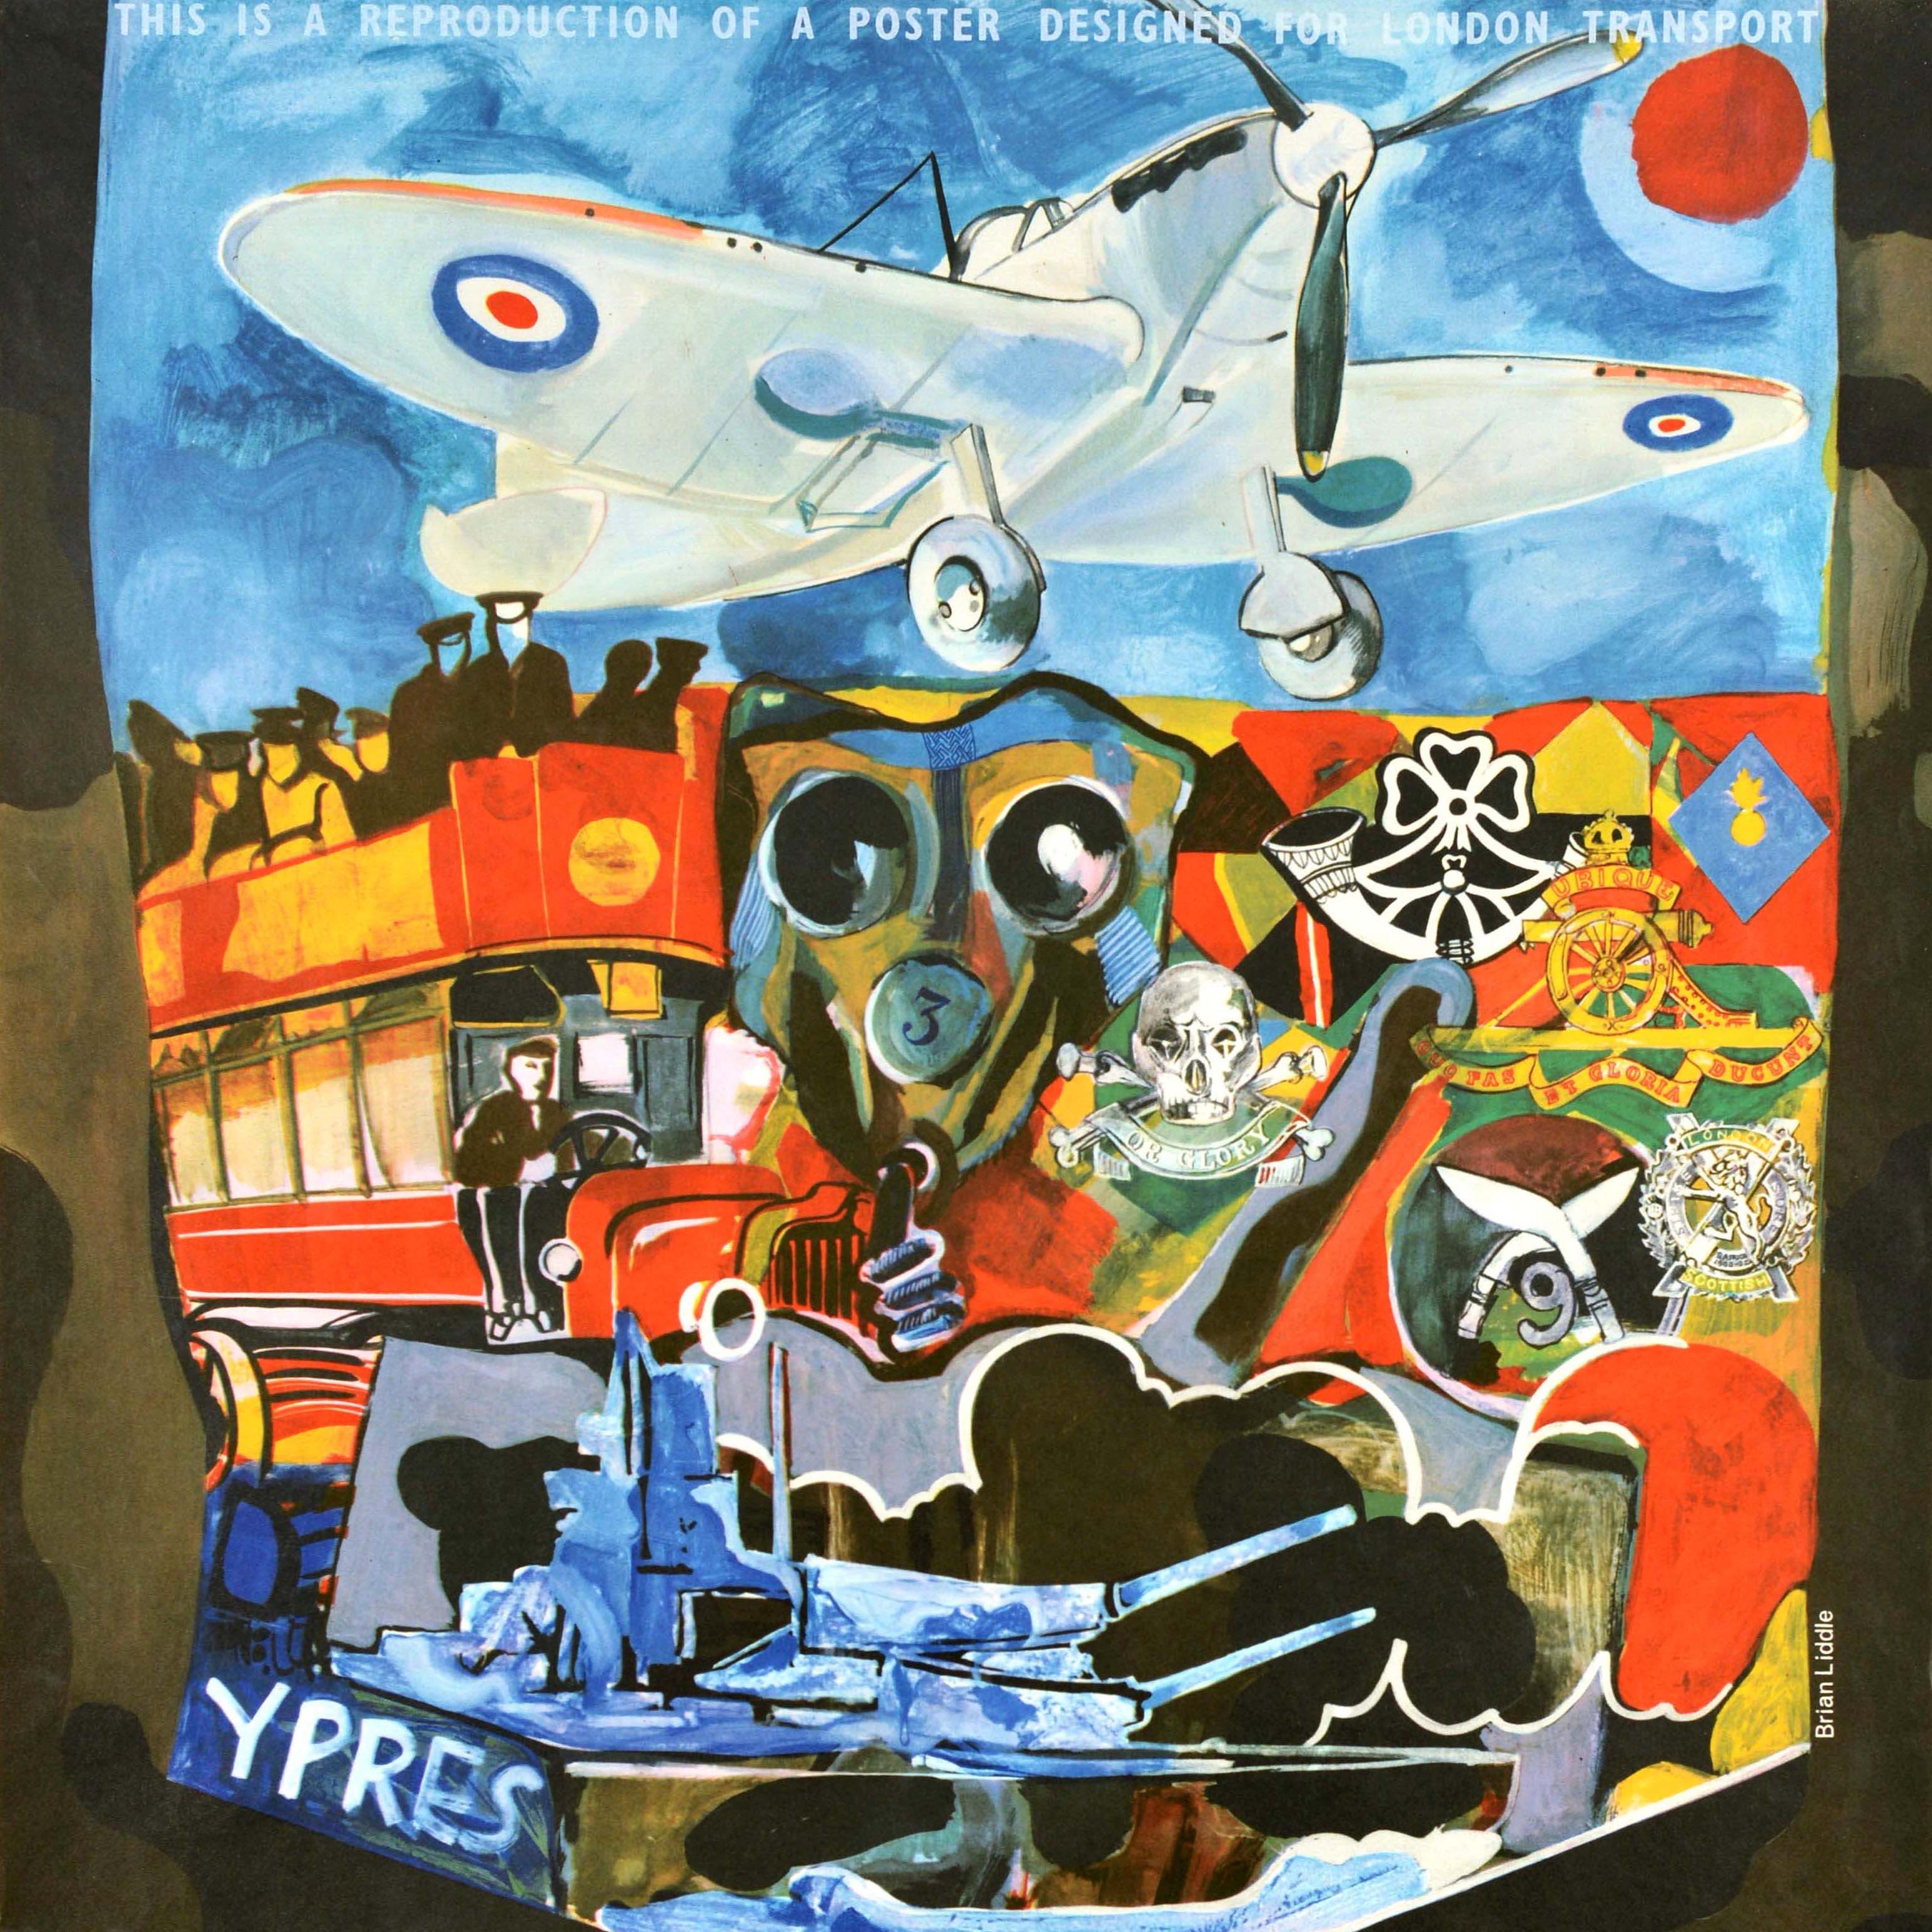 Vintage Official Reproduction Poster Imperial War Museum London Transport Liddle - Black Print by Unknown